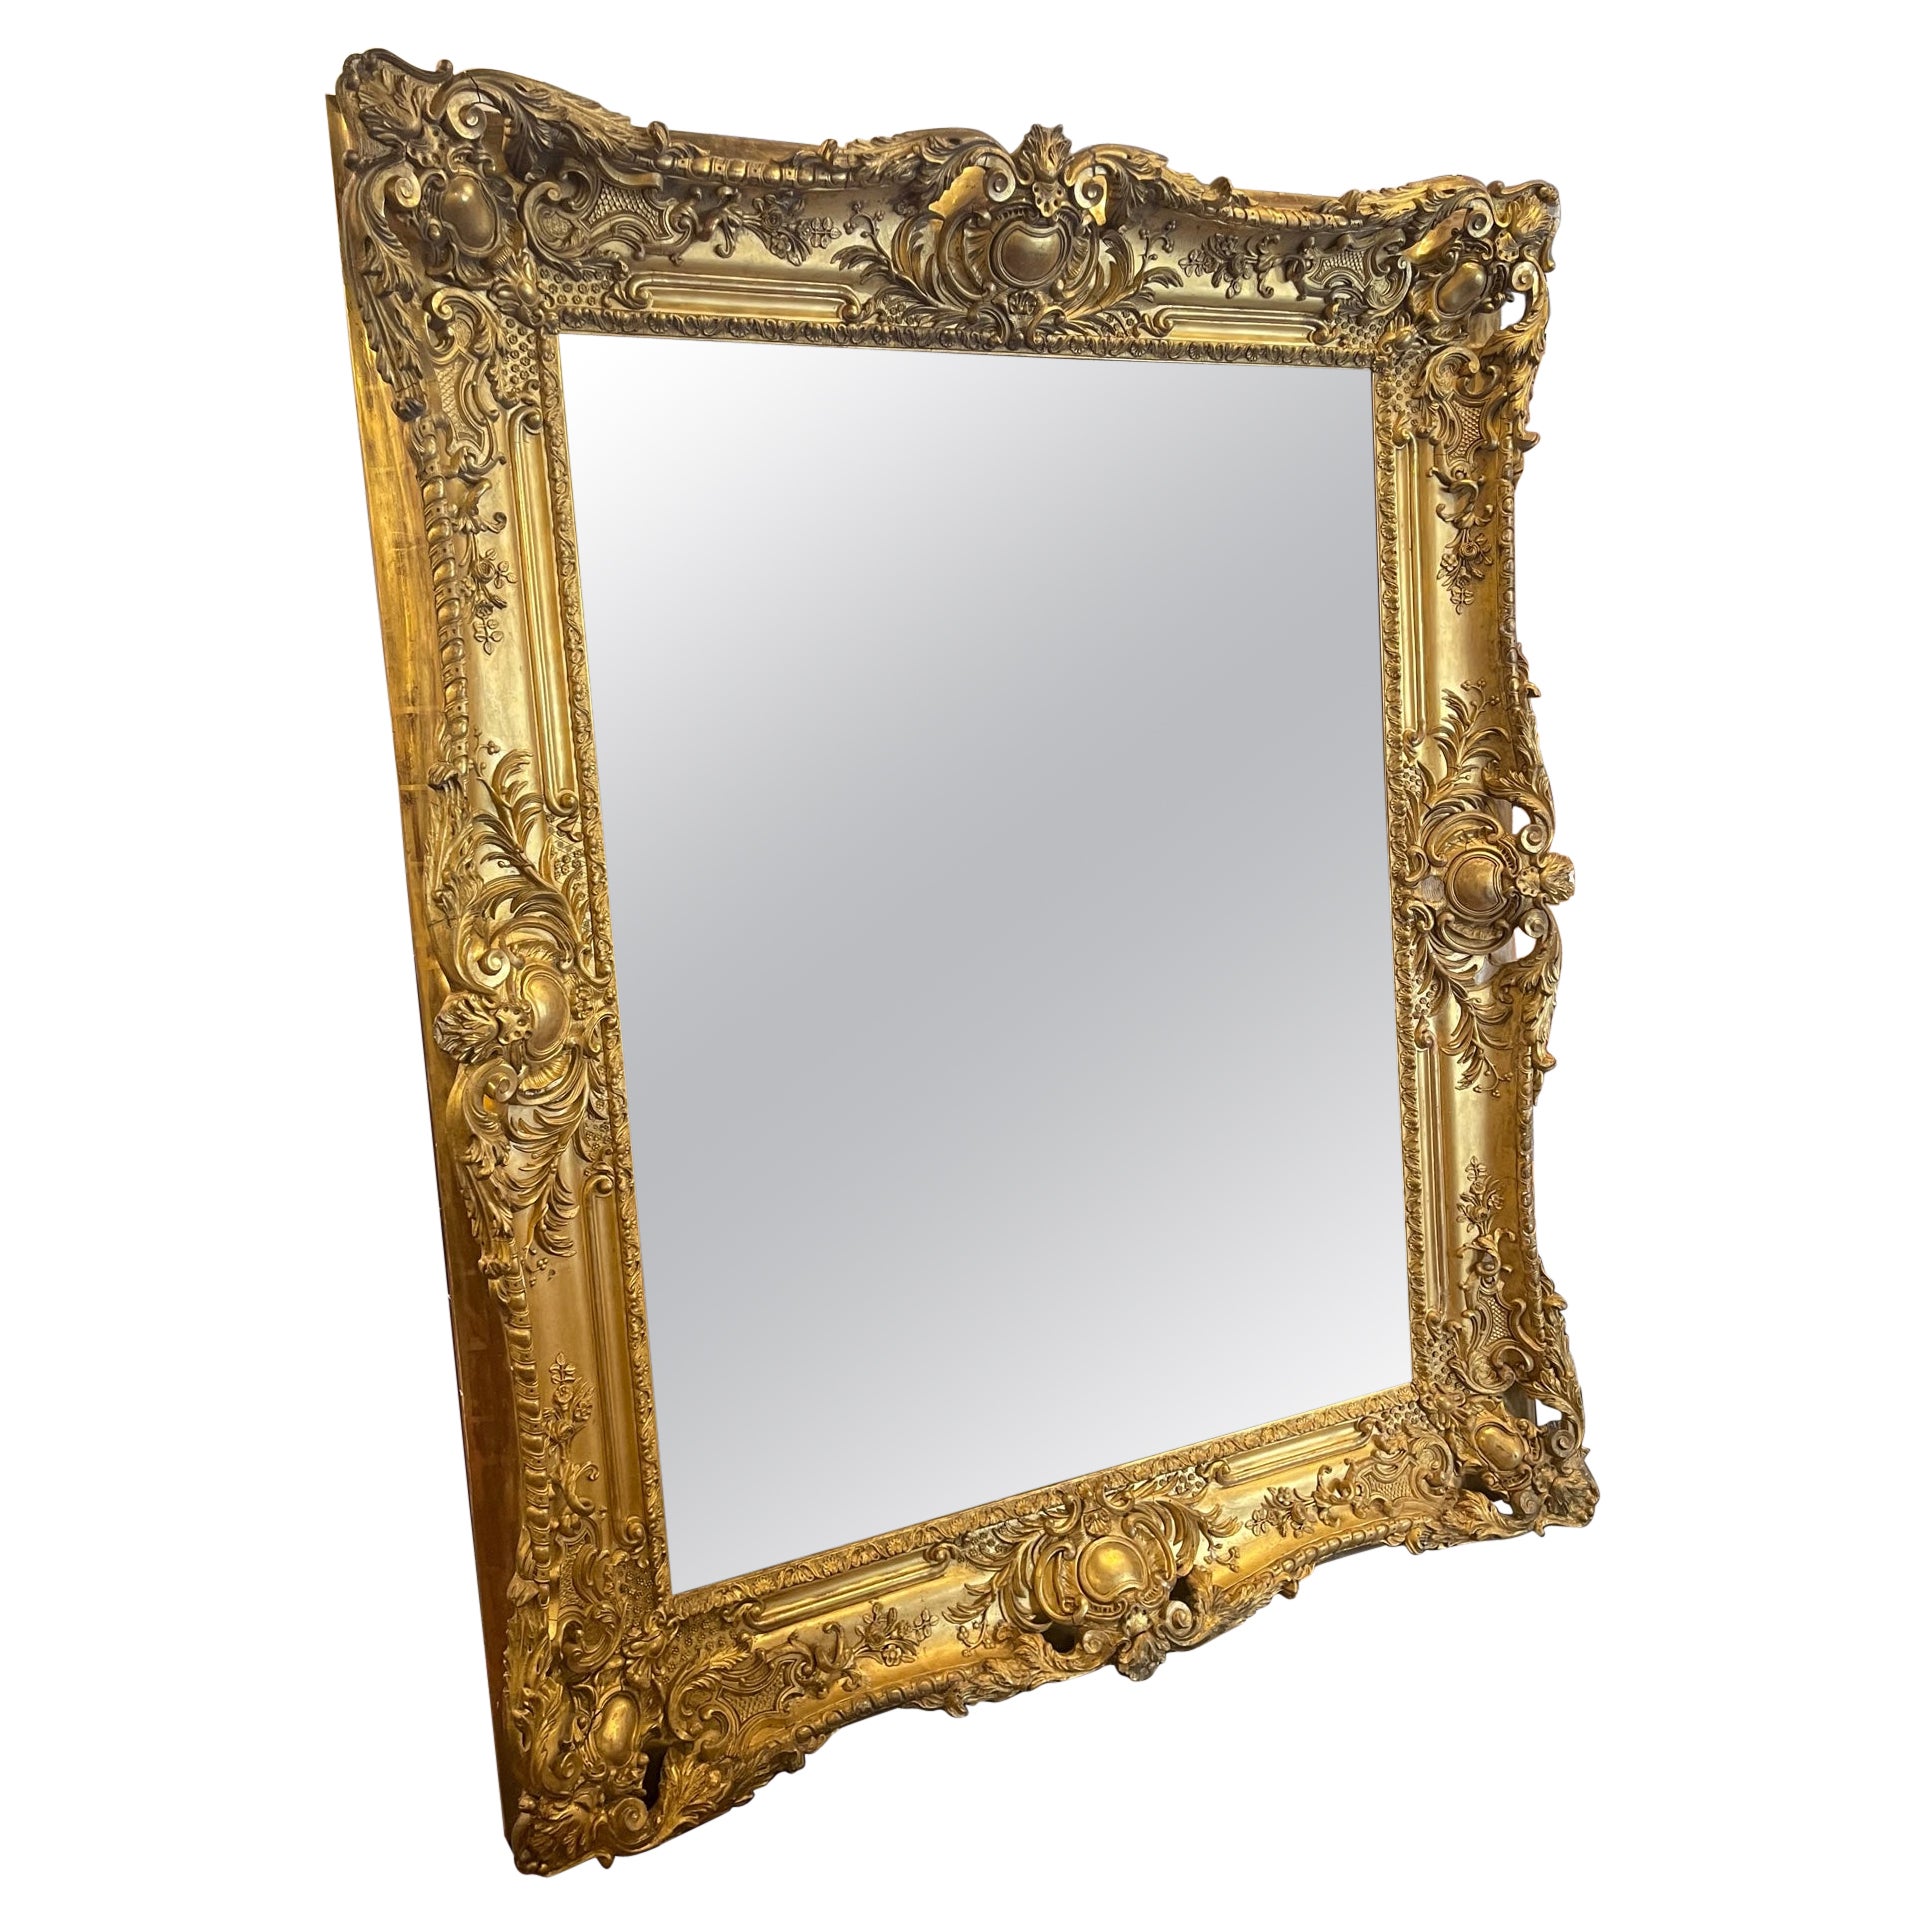 Louis XVI Style Giltwood Frame with Decorative Carved Design, Early 20th Century For Sale